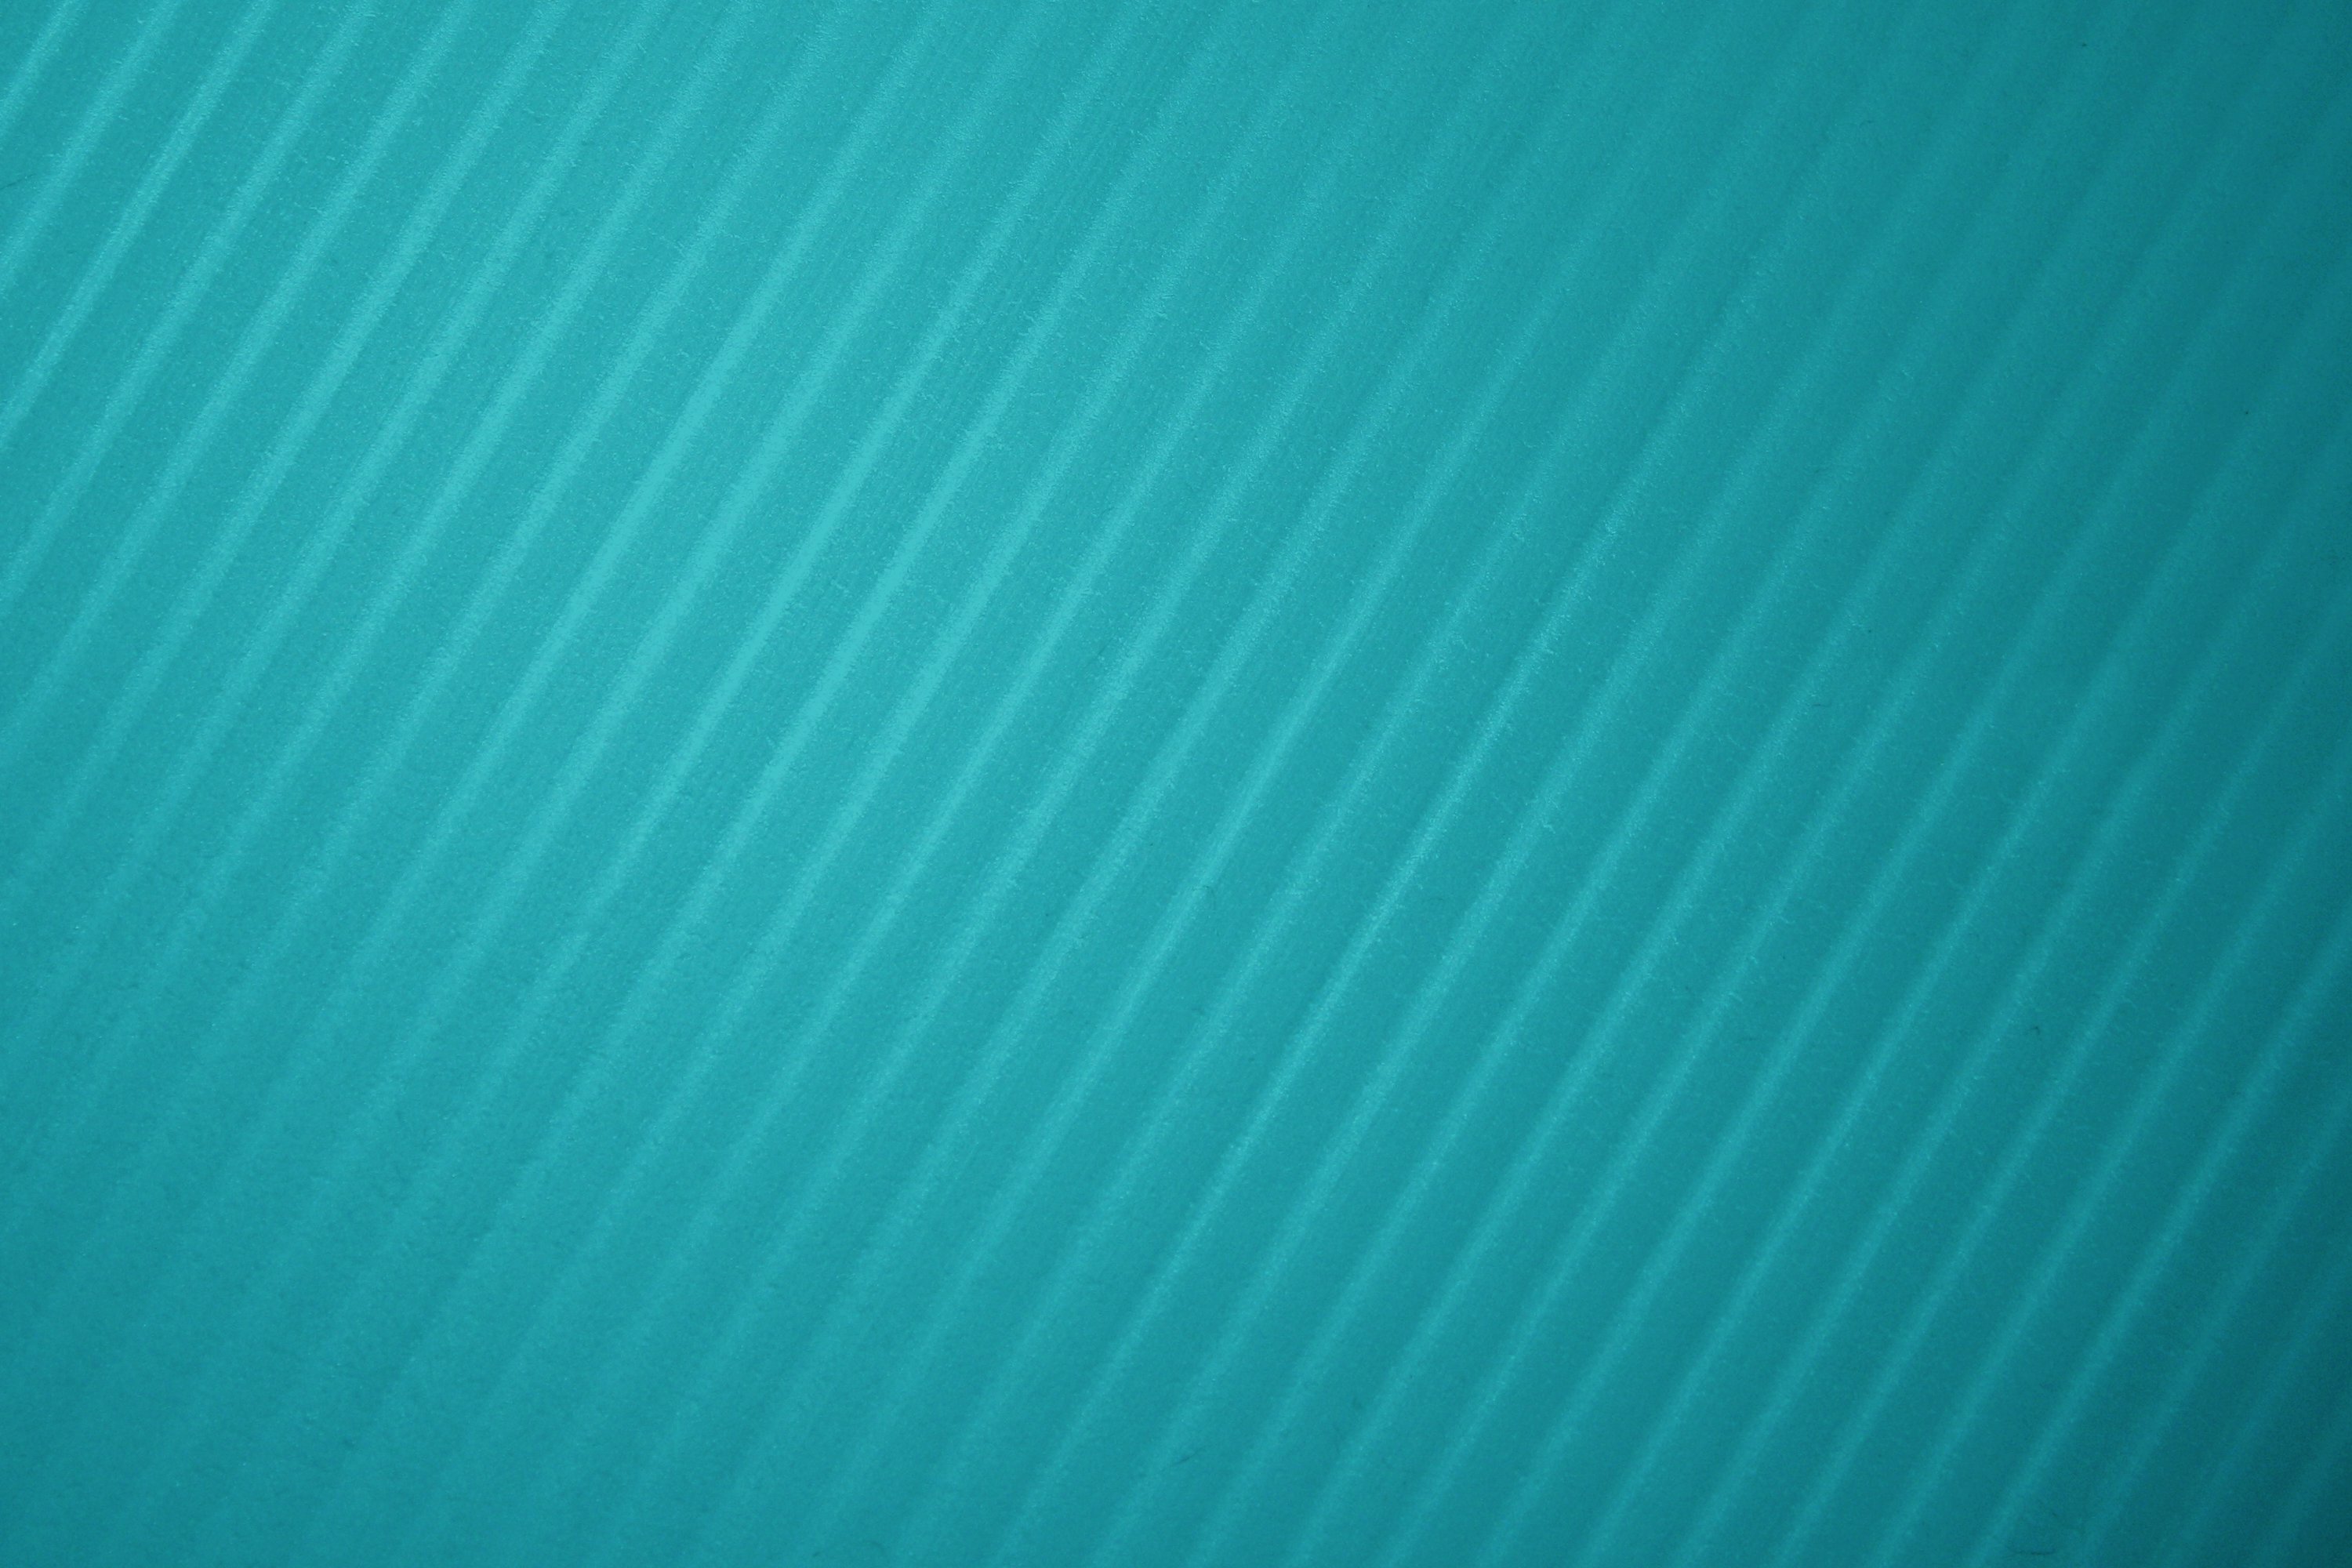 Teal Diagonal Striped Plastic Texture Picture | Free Photograph